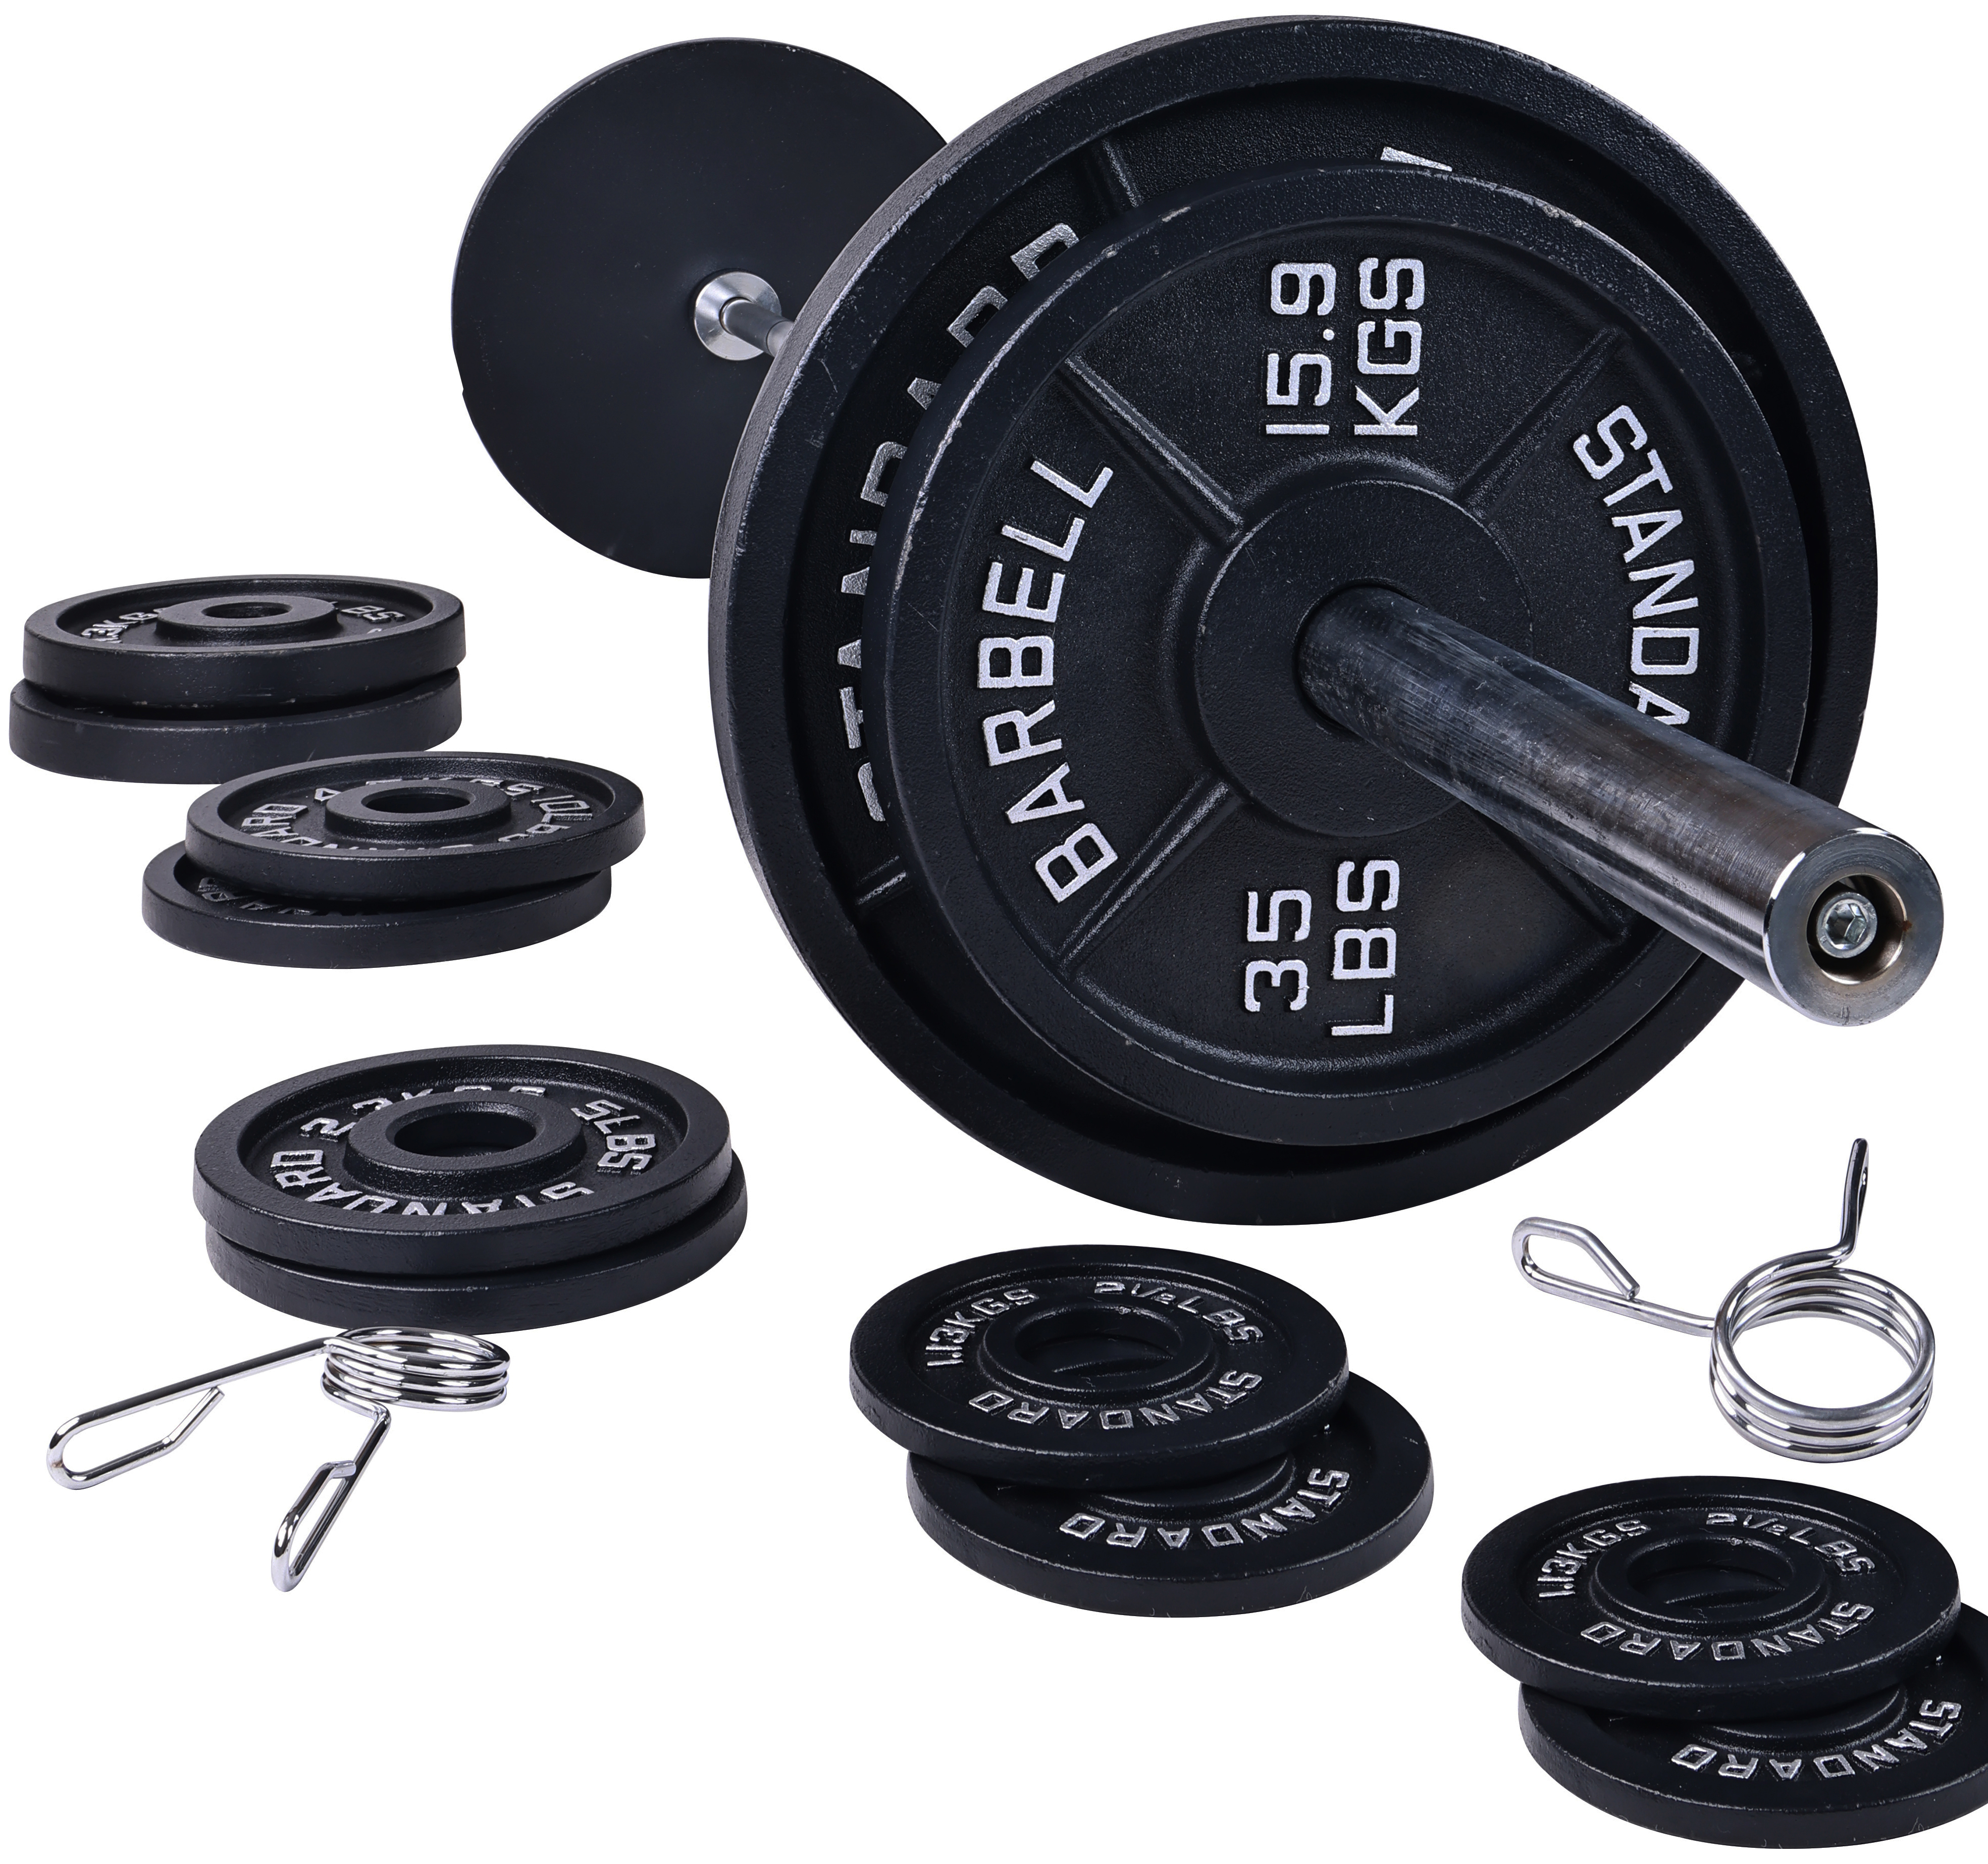 BalanceFrom Cast Iron Olympic Weight Including 7FT Olympic Barbell and Clips, 300-Pound Set (255 Pounds Plates + 45 Pounds Barbell), Multiple Packages - image 1 of 6